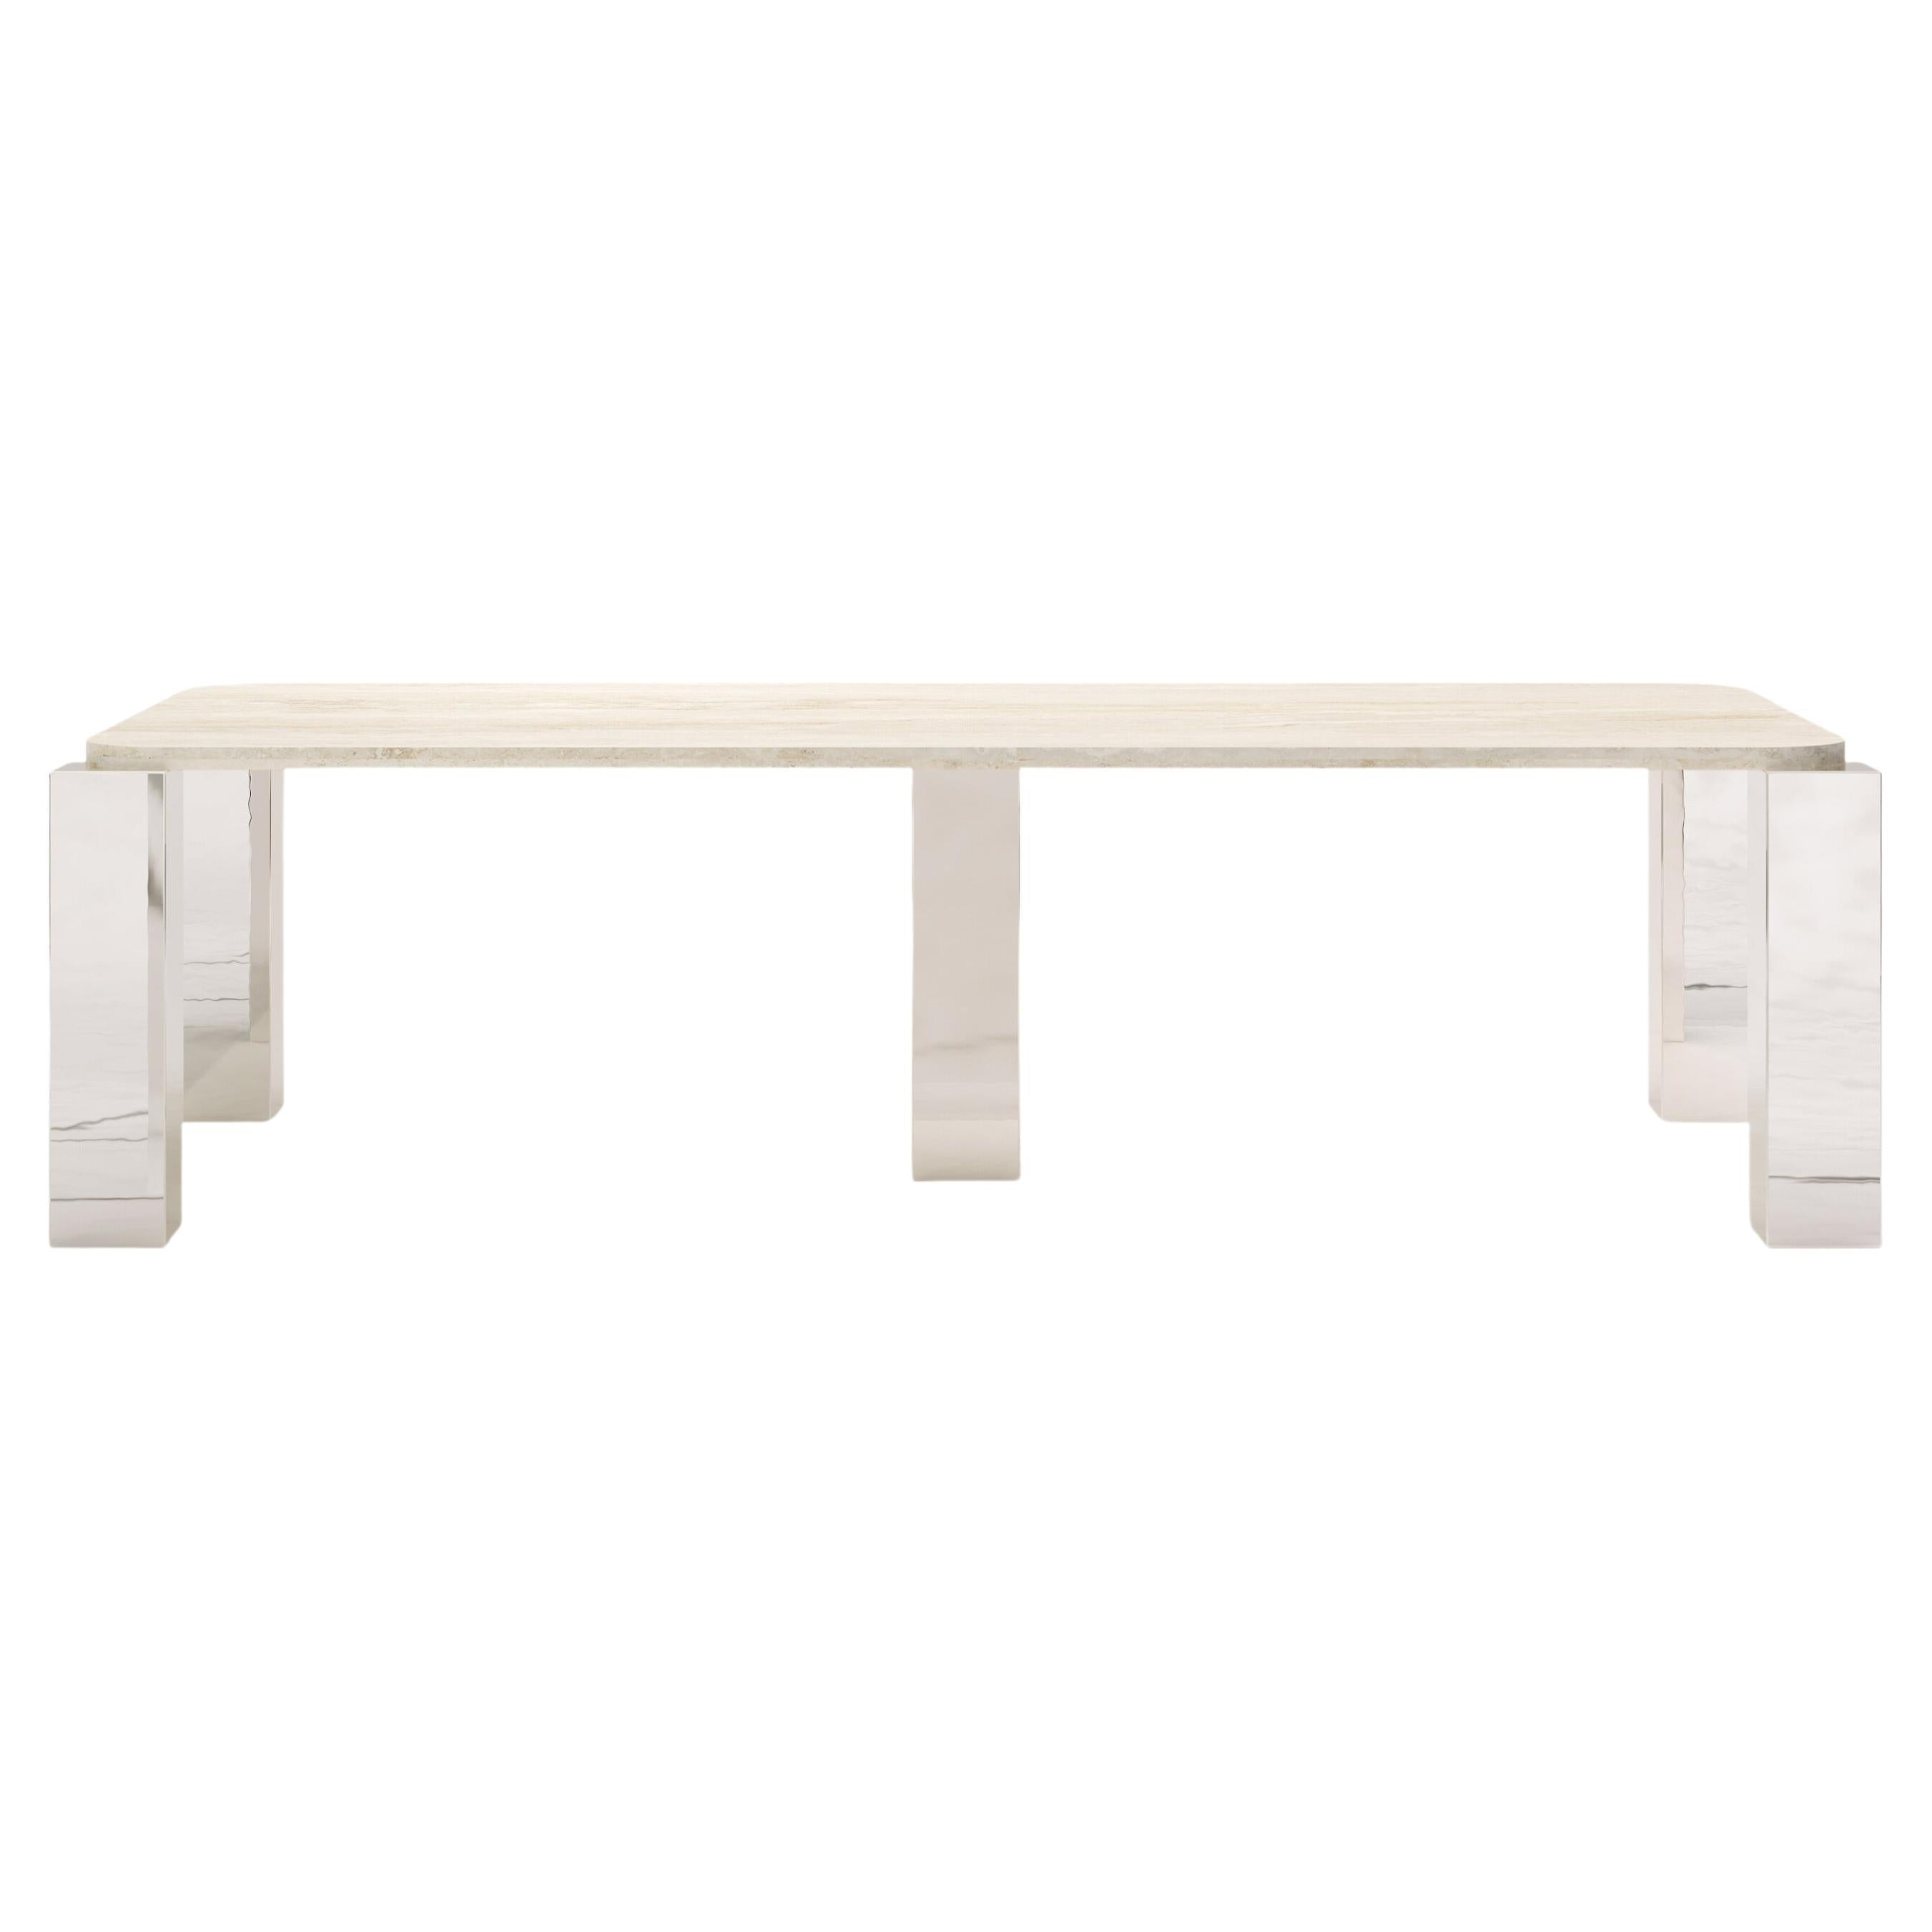 FORM(LA) Cubo Rectangle Dining Table 110”L x 50”W x 30”H Travertino & Chrome For Sale